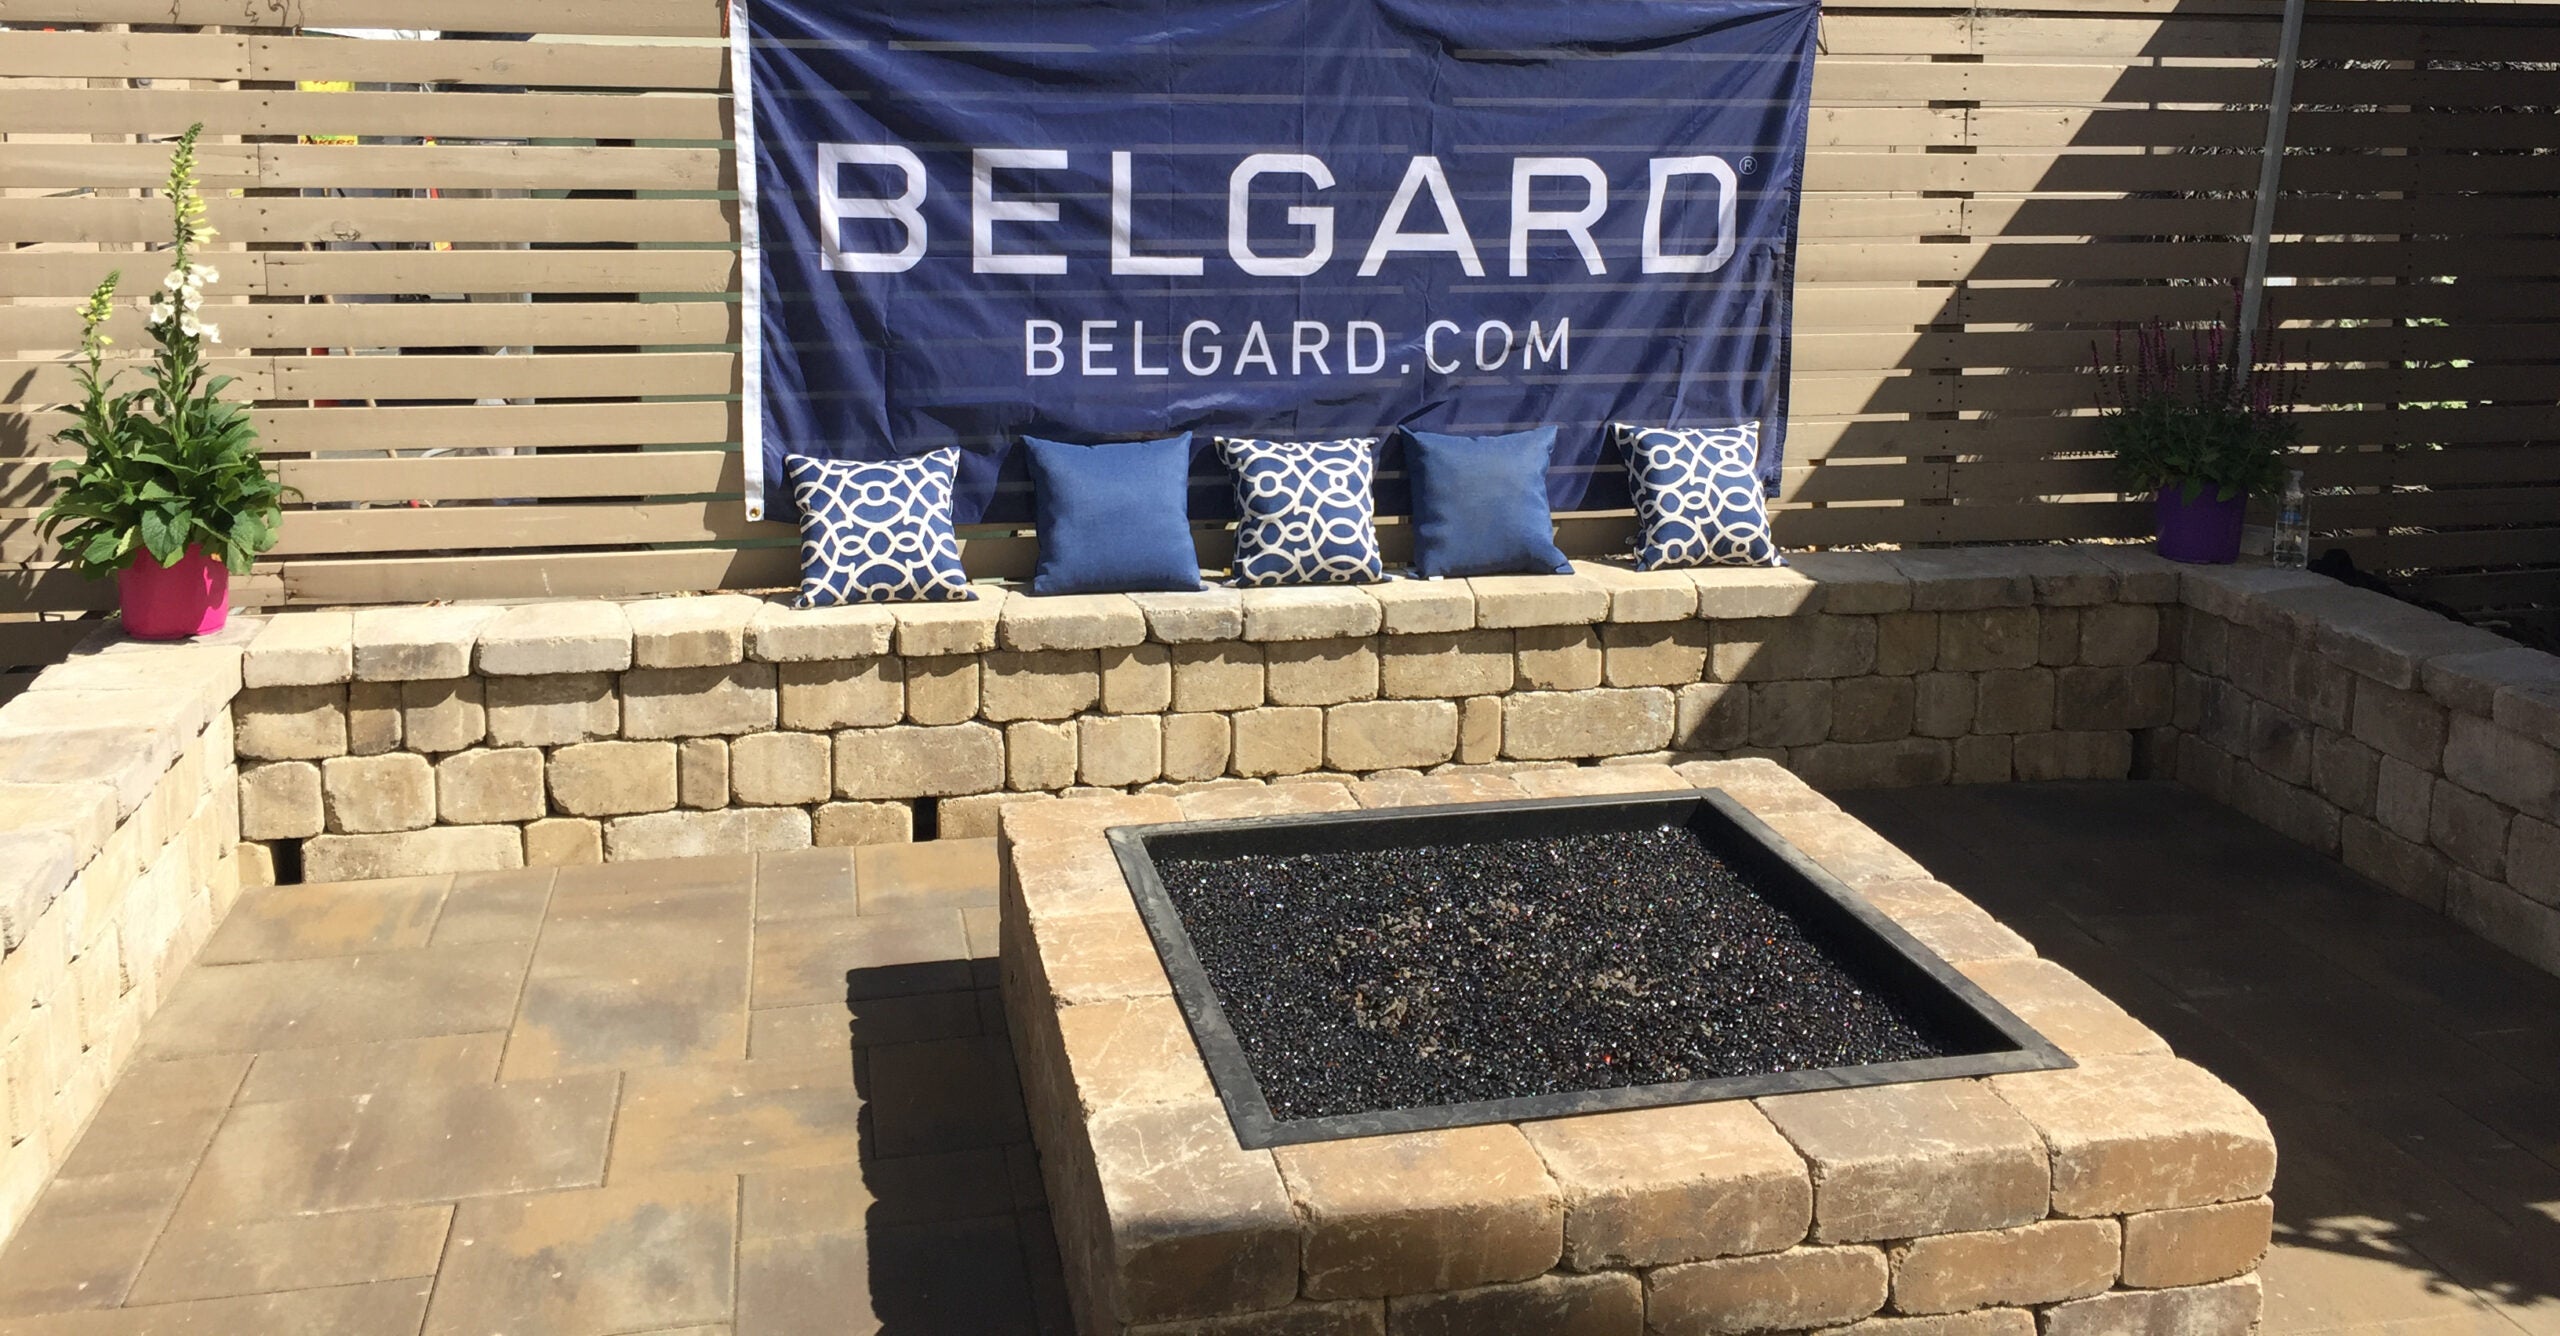 The Belgard booth was located in Sunset Celebration Beer Garden and featured a Weston Stone® fire pit surrounded by Lafitt® Rustic Slab pavers and a ???? seat wall.